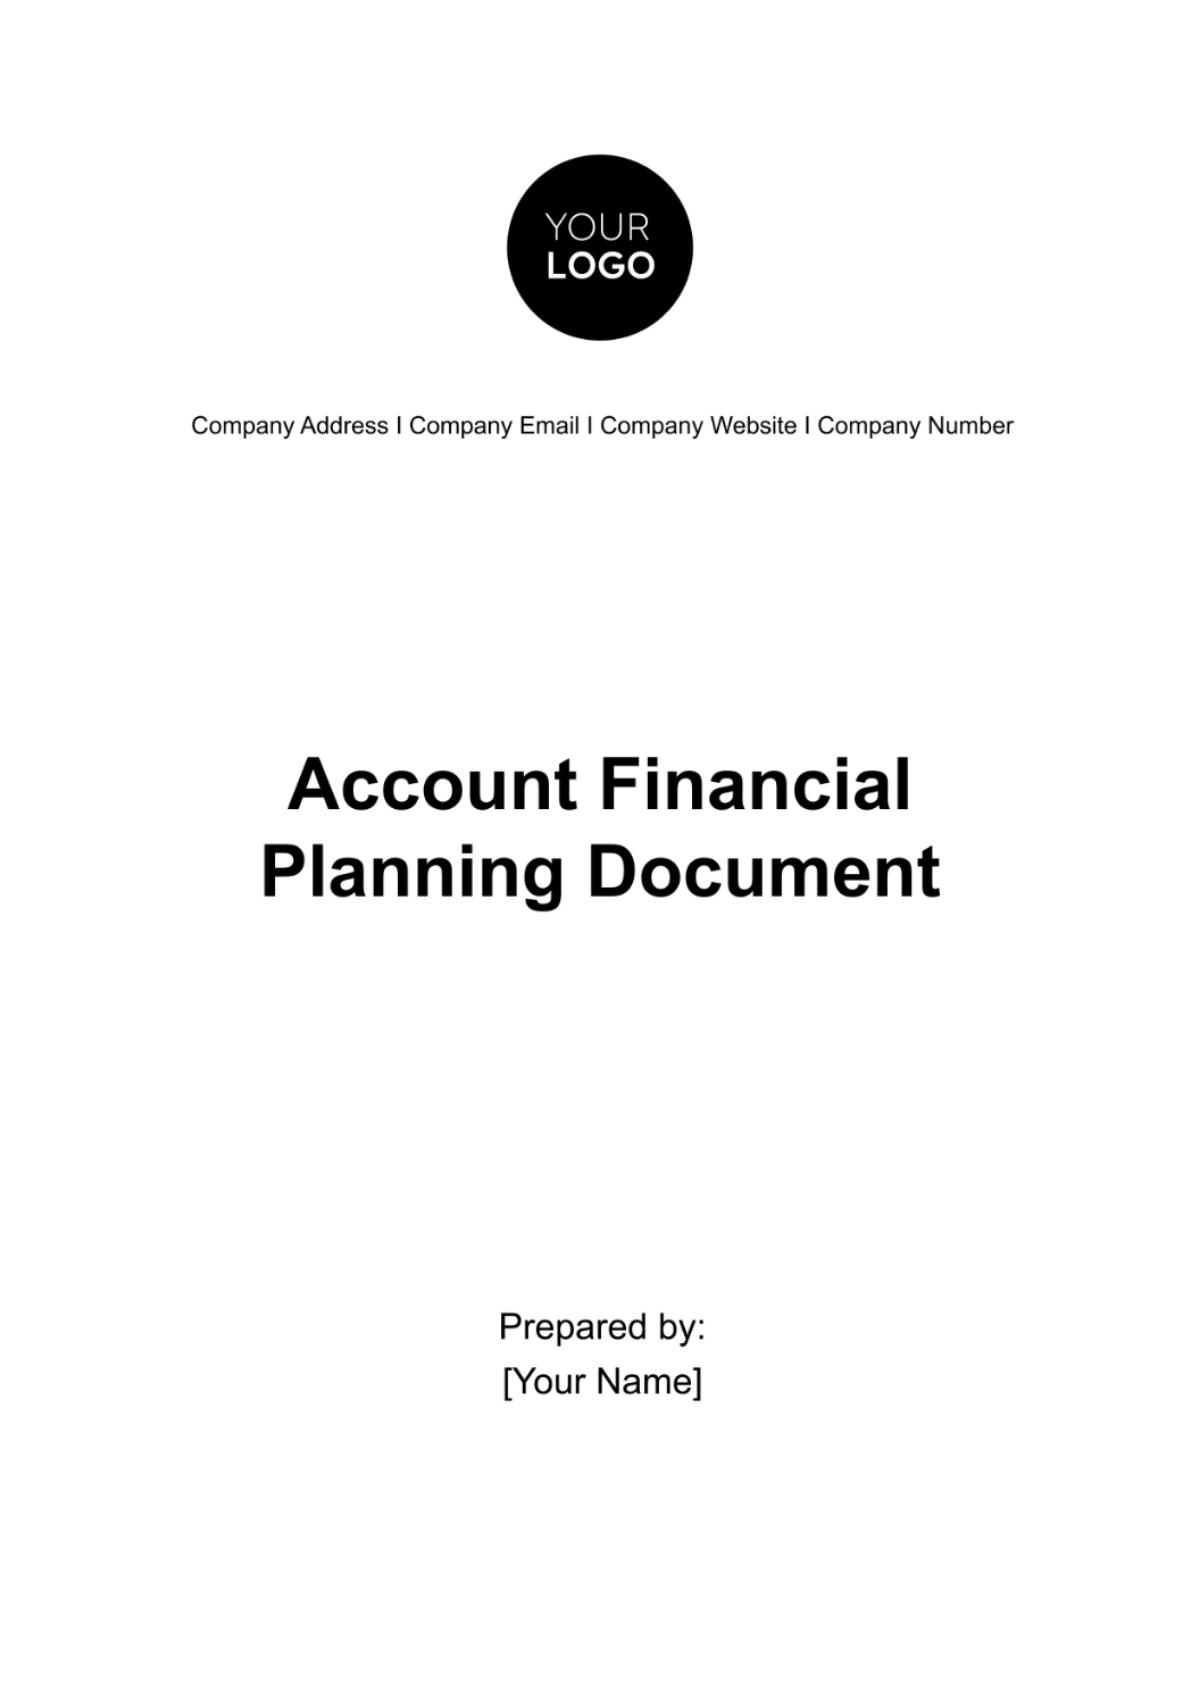 Free Account Financial Planning Document Template